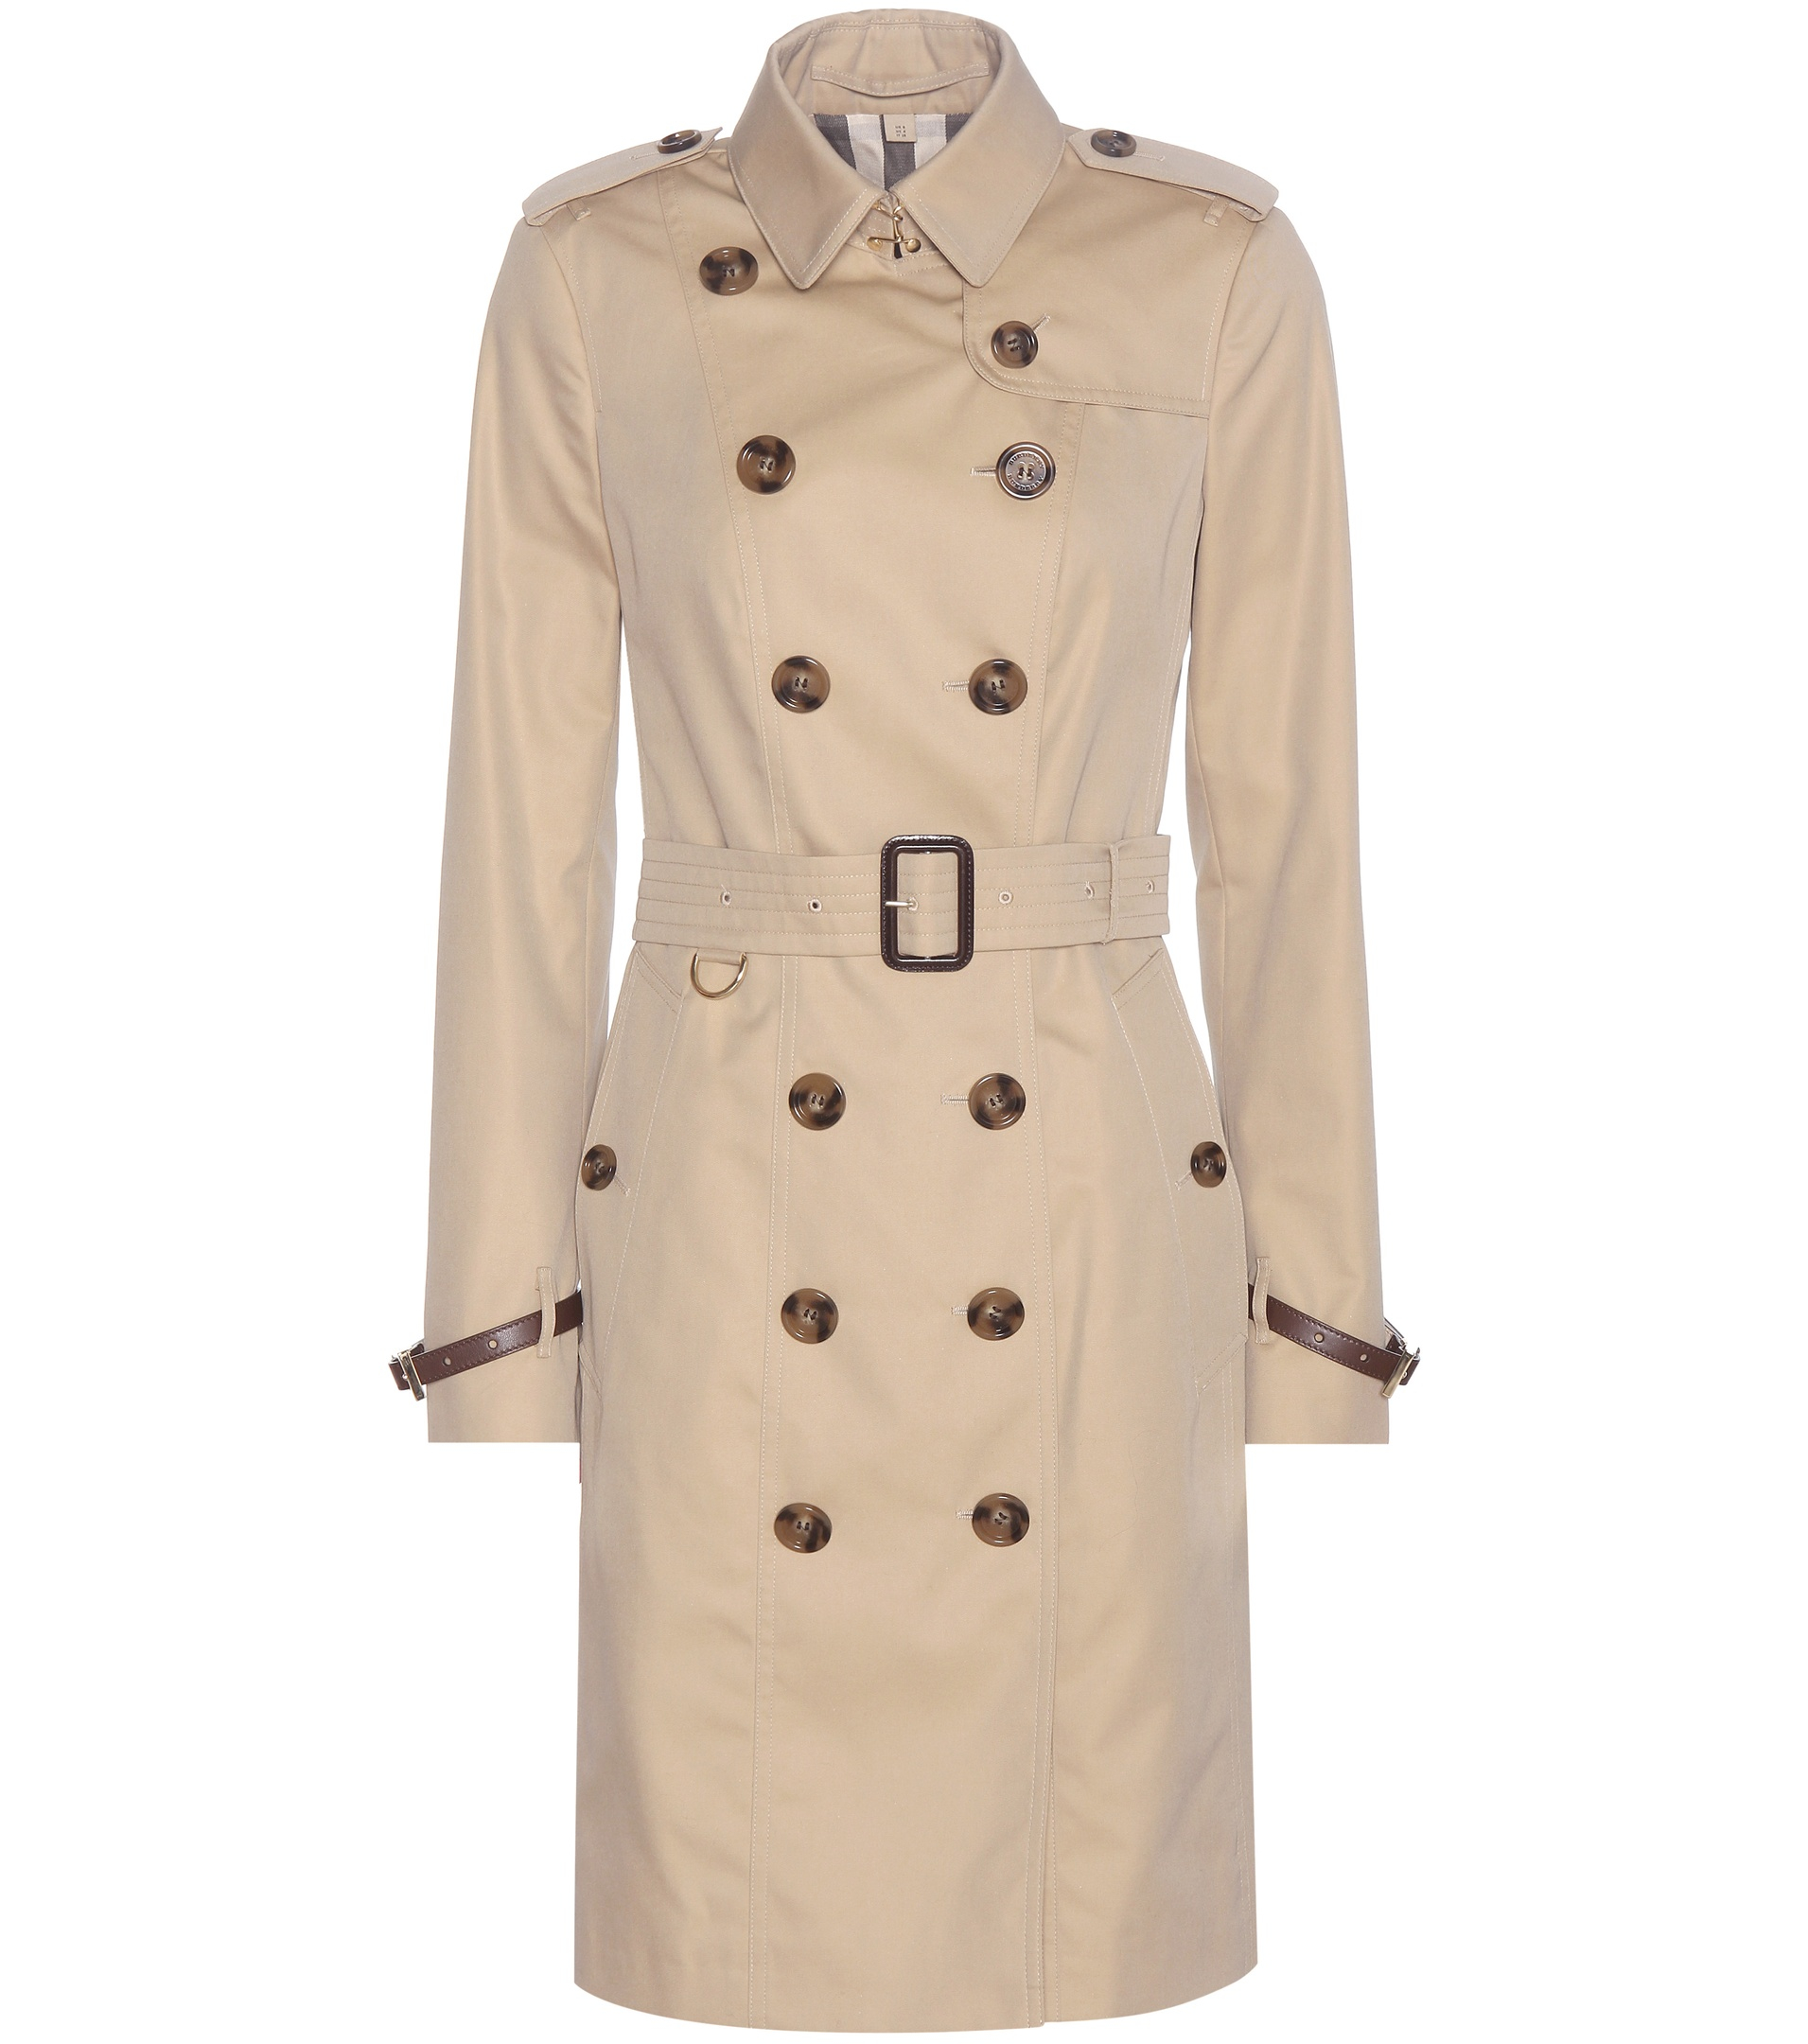 Lyst - Burberry The Sandringham Cotton Trench Coat in Natural